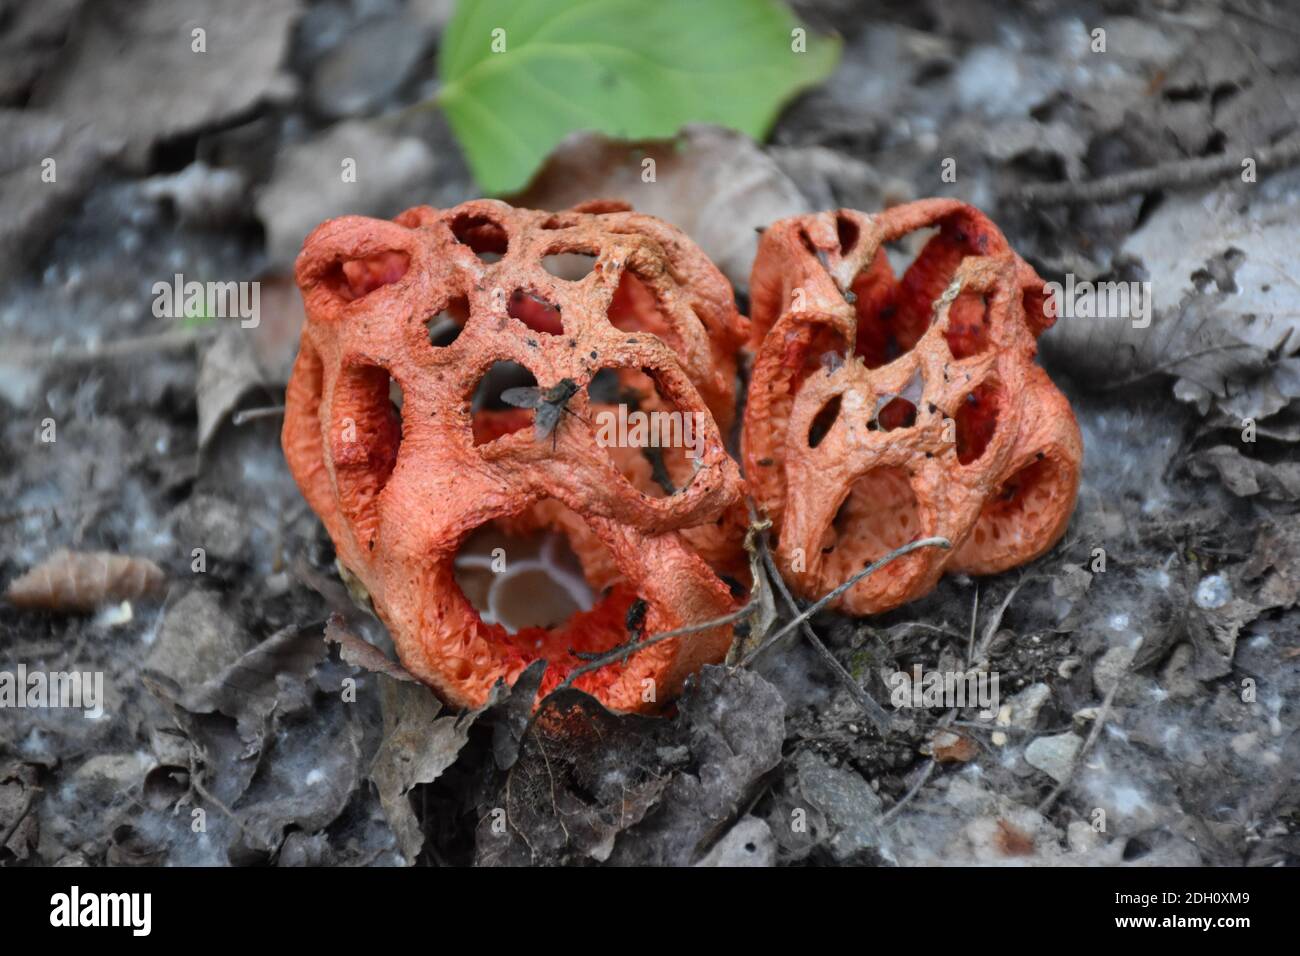 Mushroom called Red Cage (Clathrus ruber), highlights its rotten meat smell that attracts flies. Stock Photo